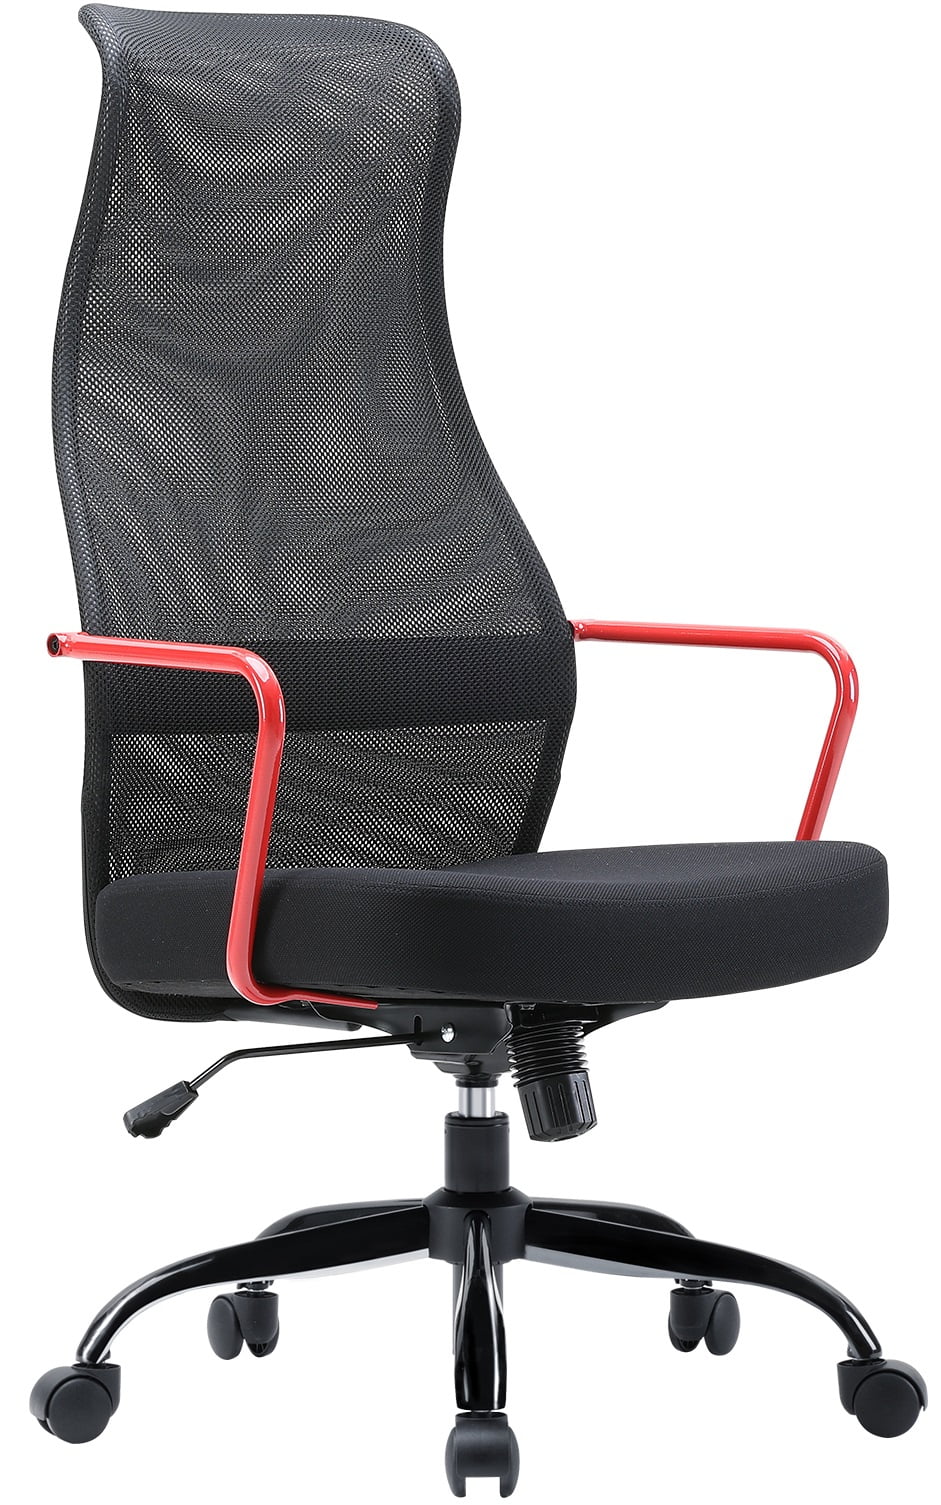 SIHOO Ergonomic Office Chair Mesh High Back Head and Lumbar Support, Computer Desk Chair Adjustable Heigh and Tilt Function Bed